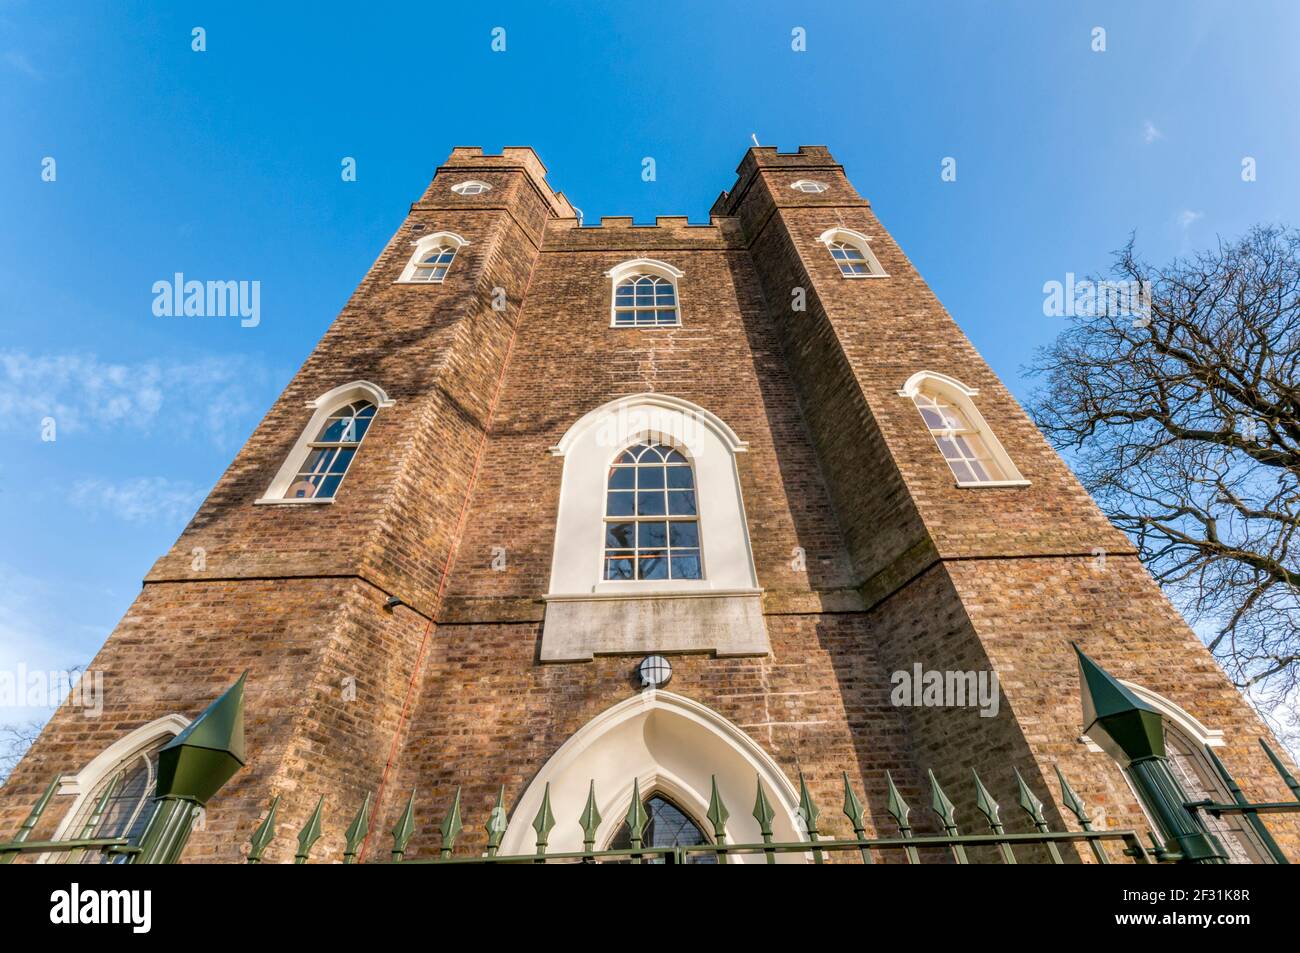 Severndroog Castle on Shooters Hill in Greenwich, south London.  Details in Description. Stock Photo